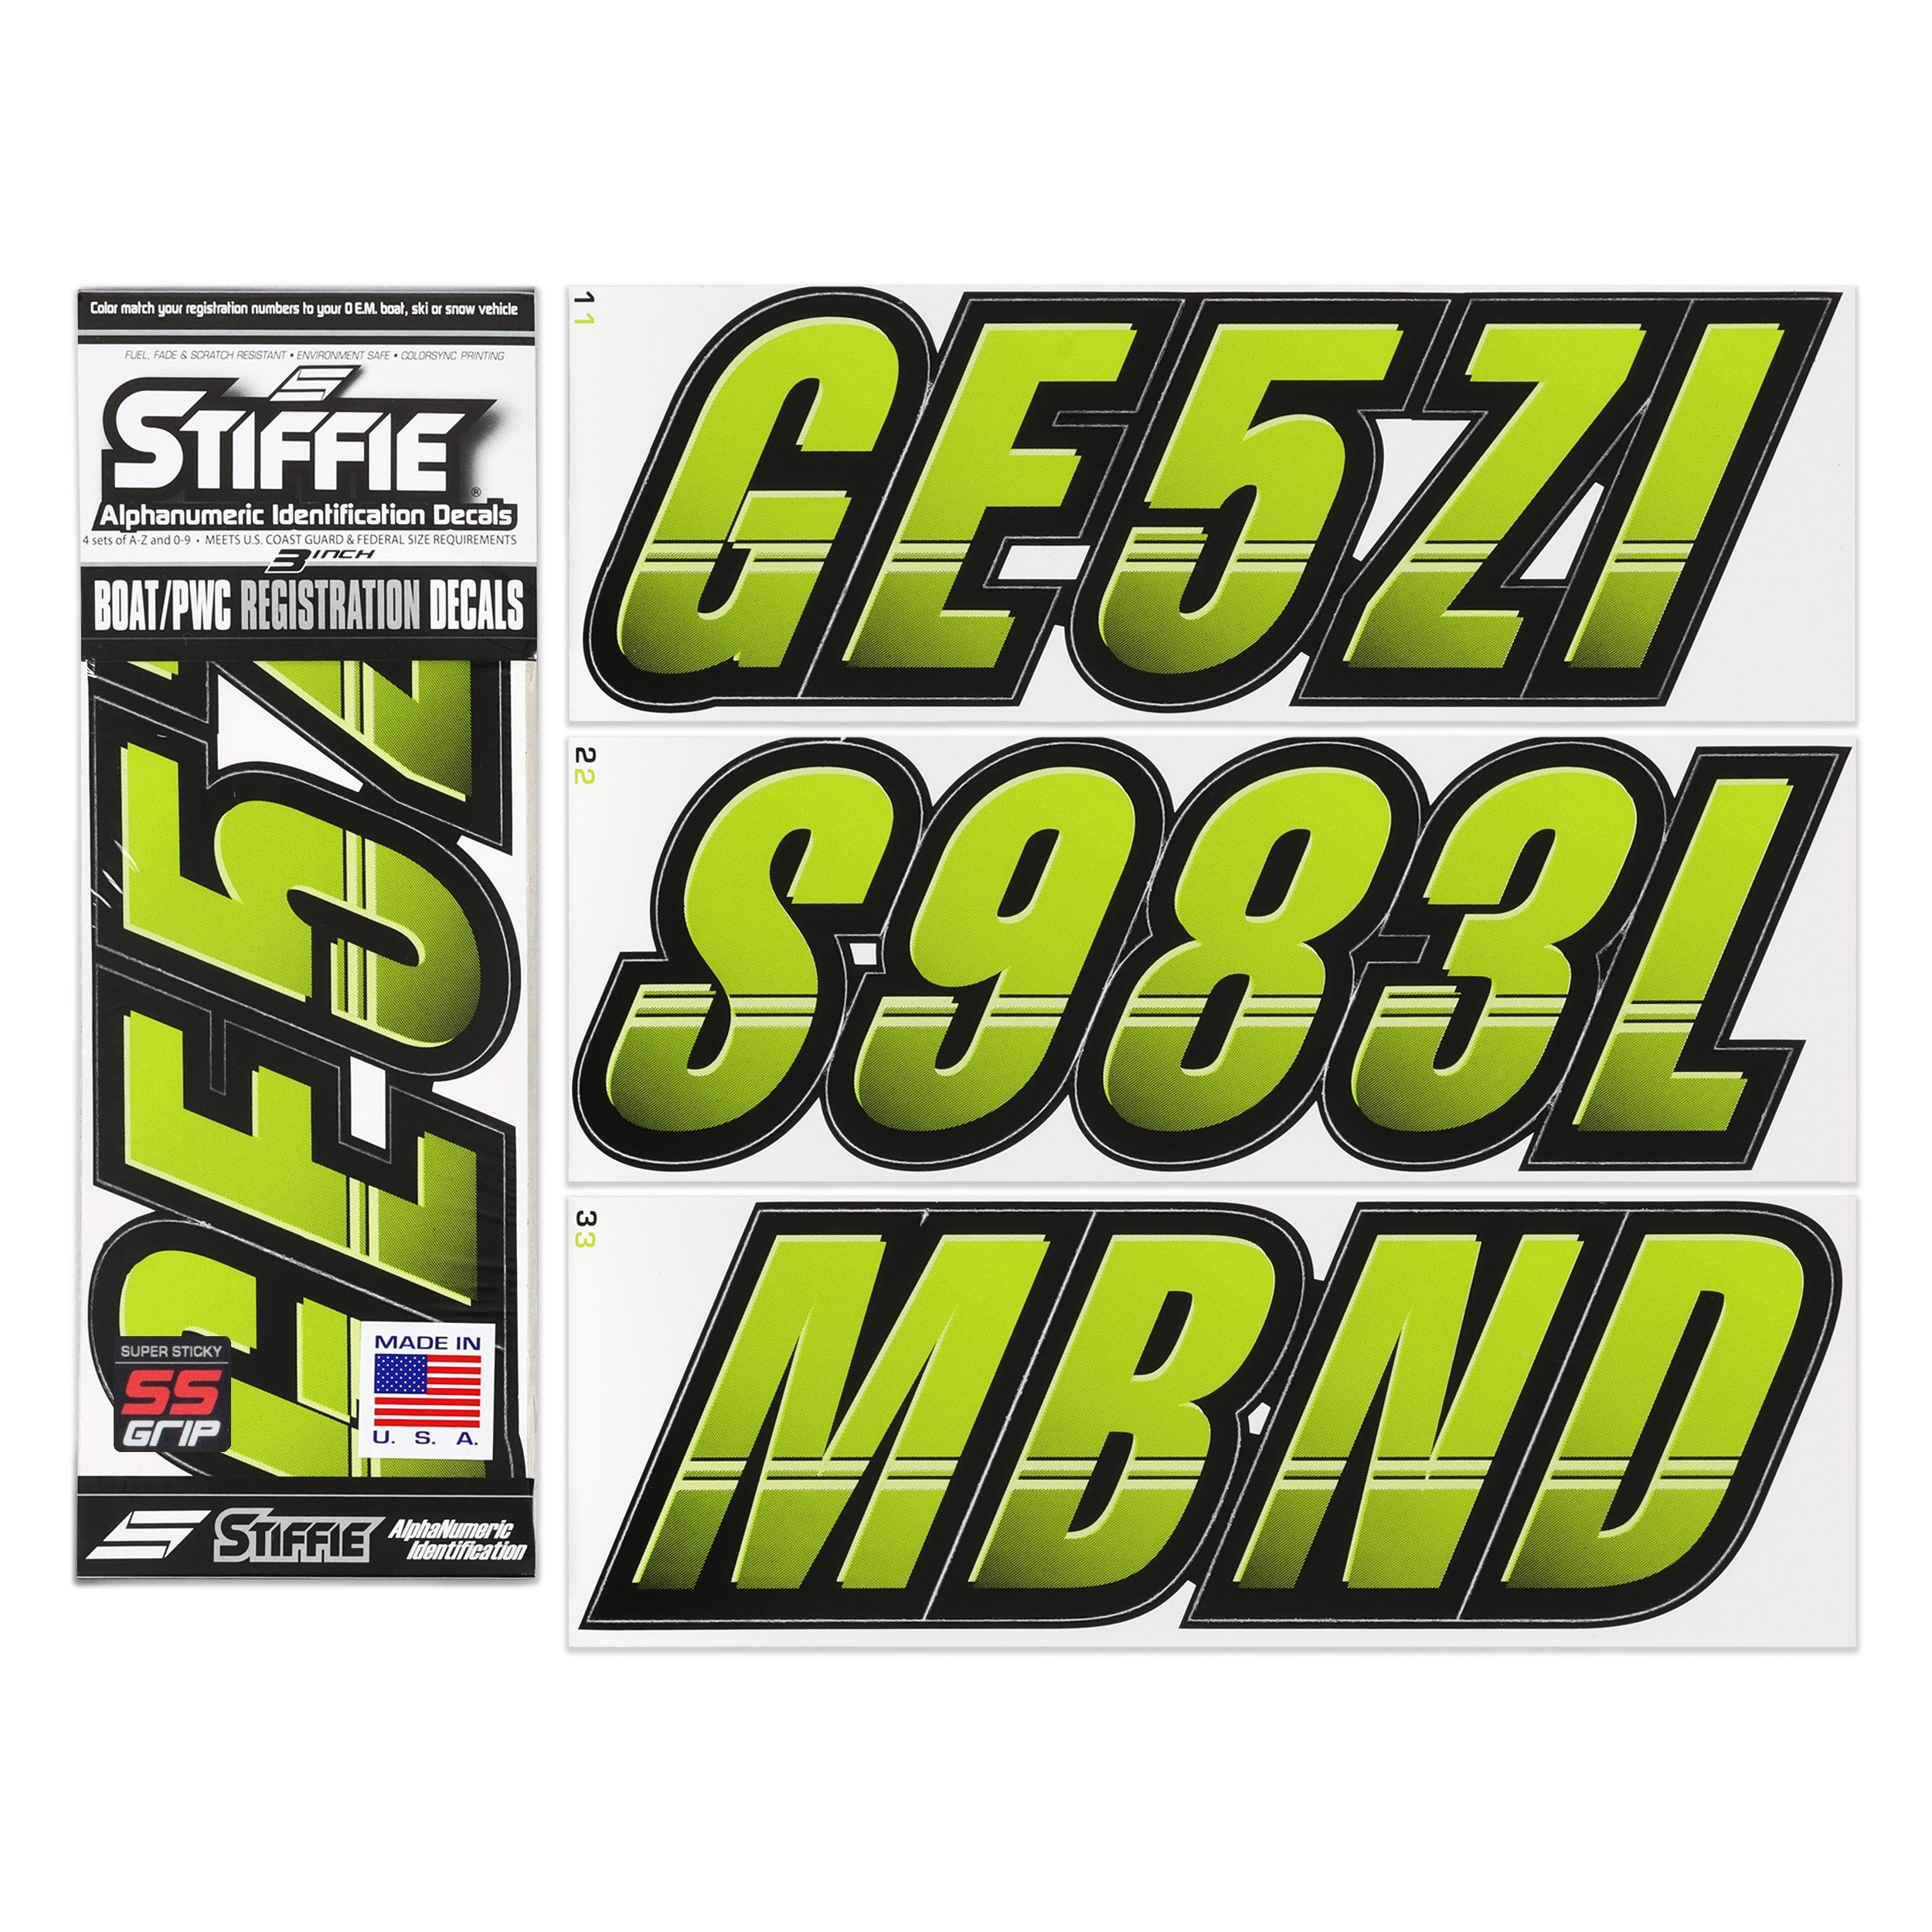 Stiffie Techtron Atomic Green/Black Super Sticky 3" Alpha Numeric Registration Identification Numbers Stickers Decals for Sea-Doo Spark, Inflatable Boats, Ribs, Hypalon/PVC, PWC and Boats